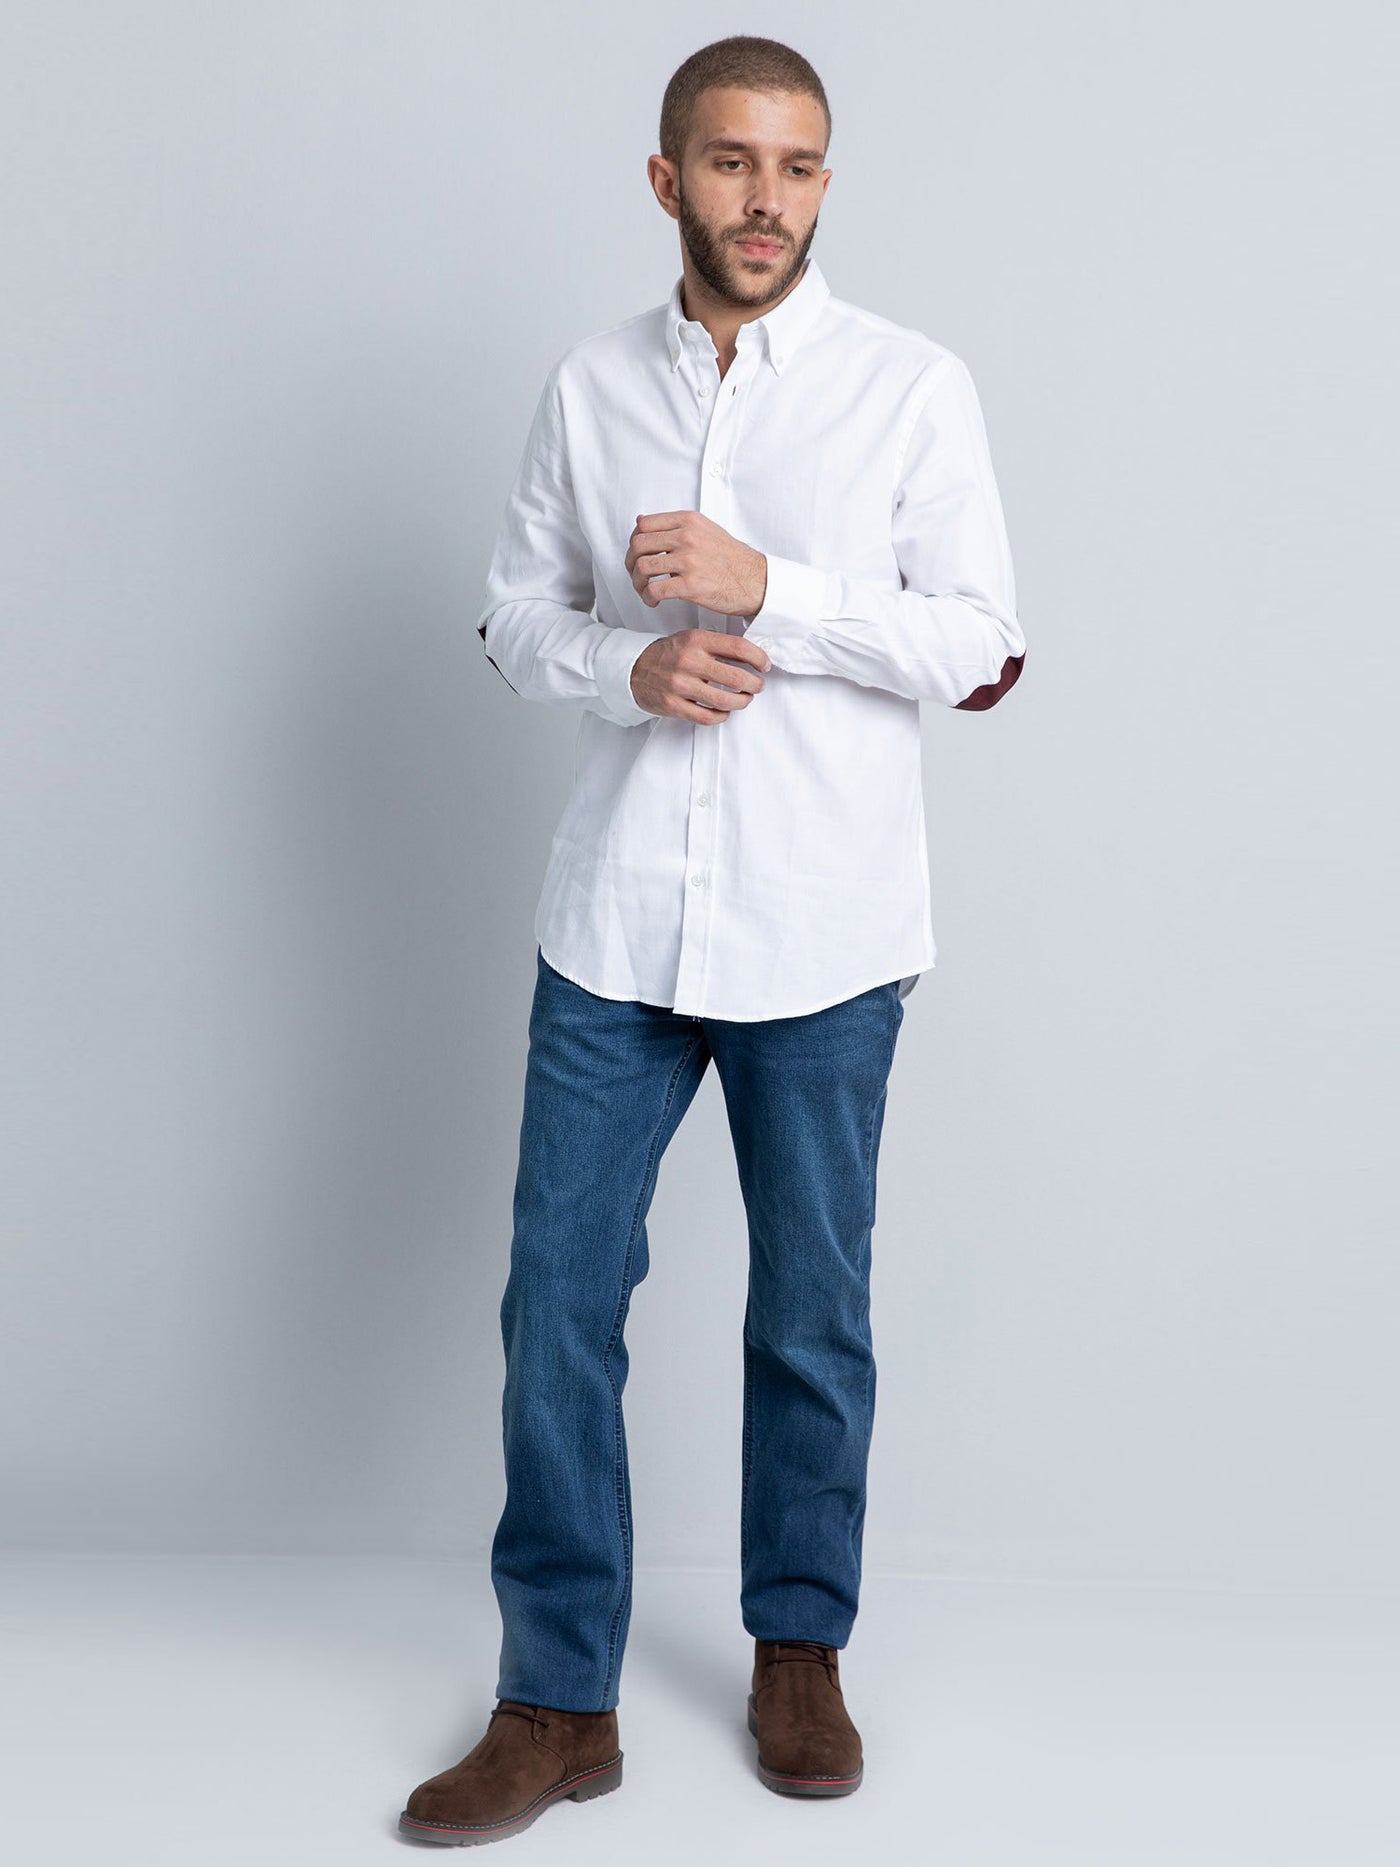 Dalydress Mens Button Down Contrast Elbow Patch Shirt